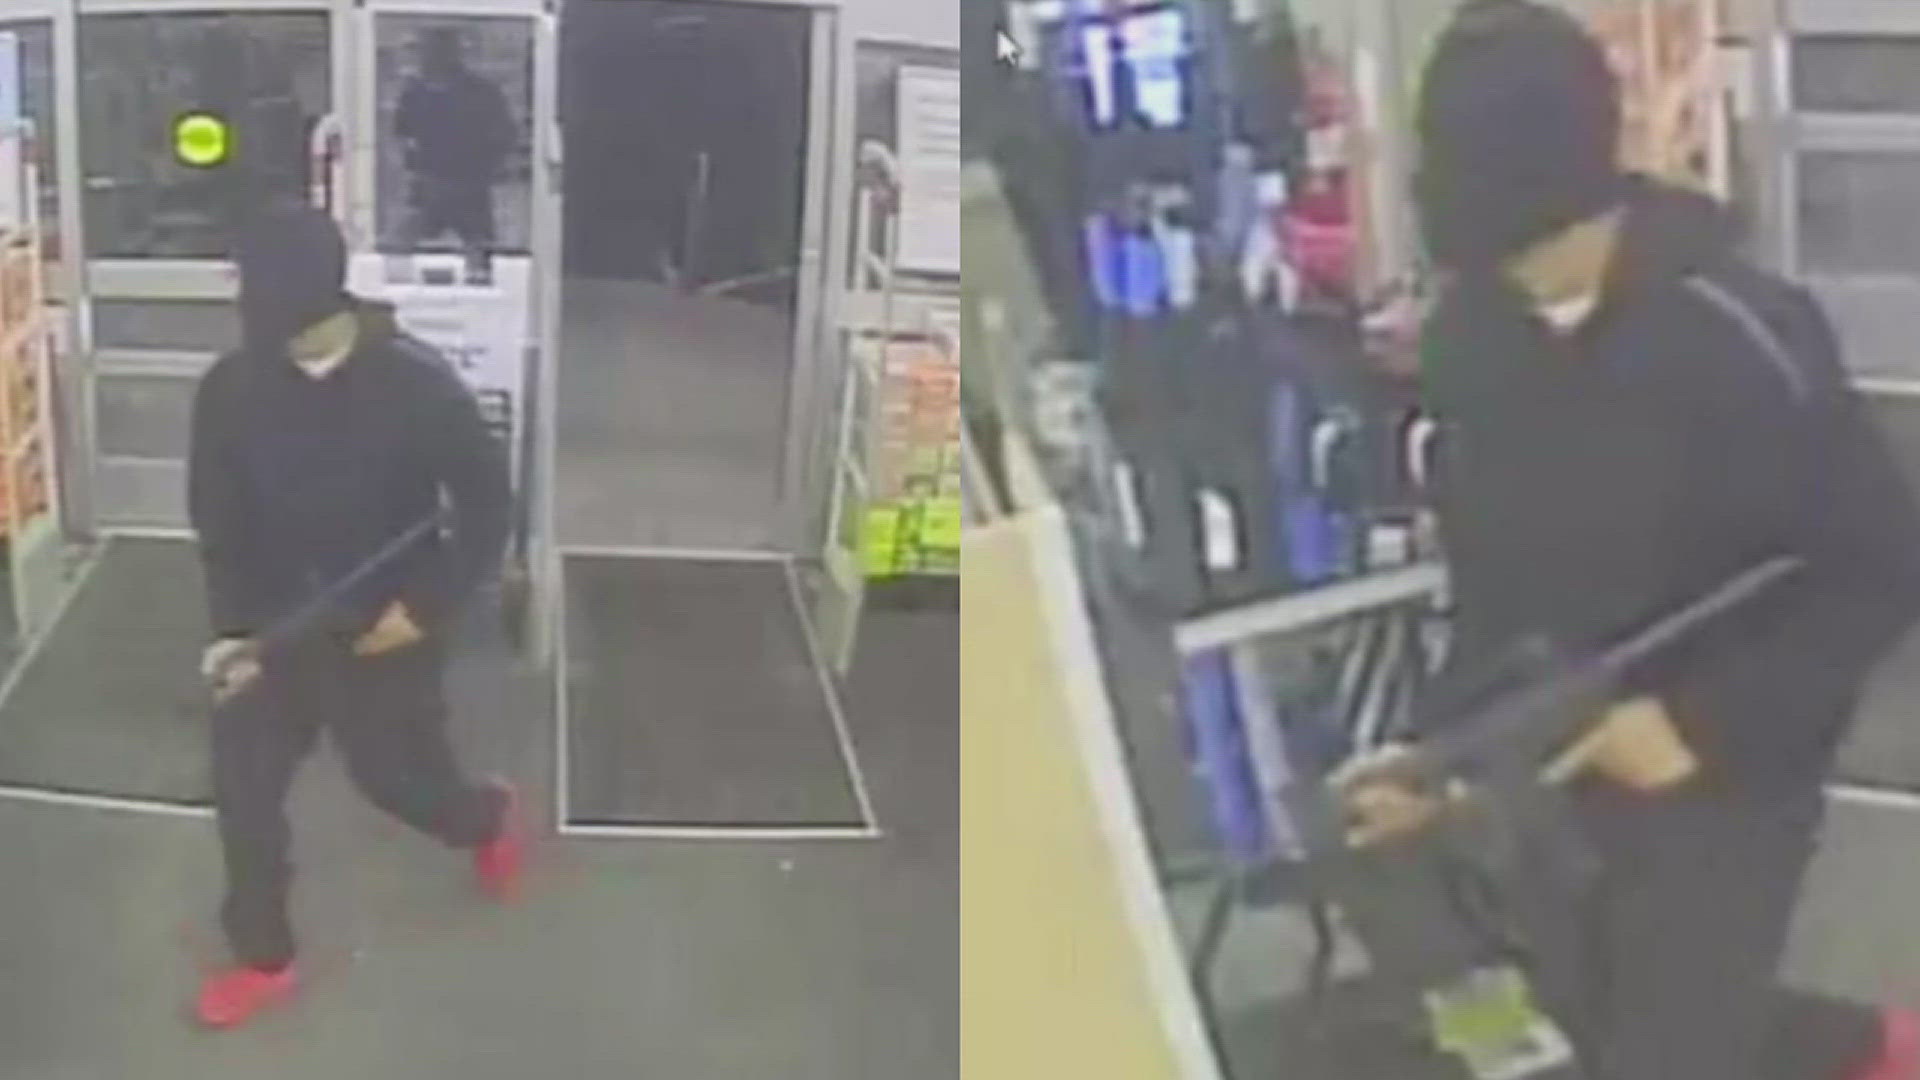 Milan police have released descriptions and images of two suspects who displayed an AR-style rifle during a May 12 armed robbery at Walgreens.